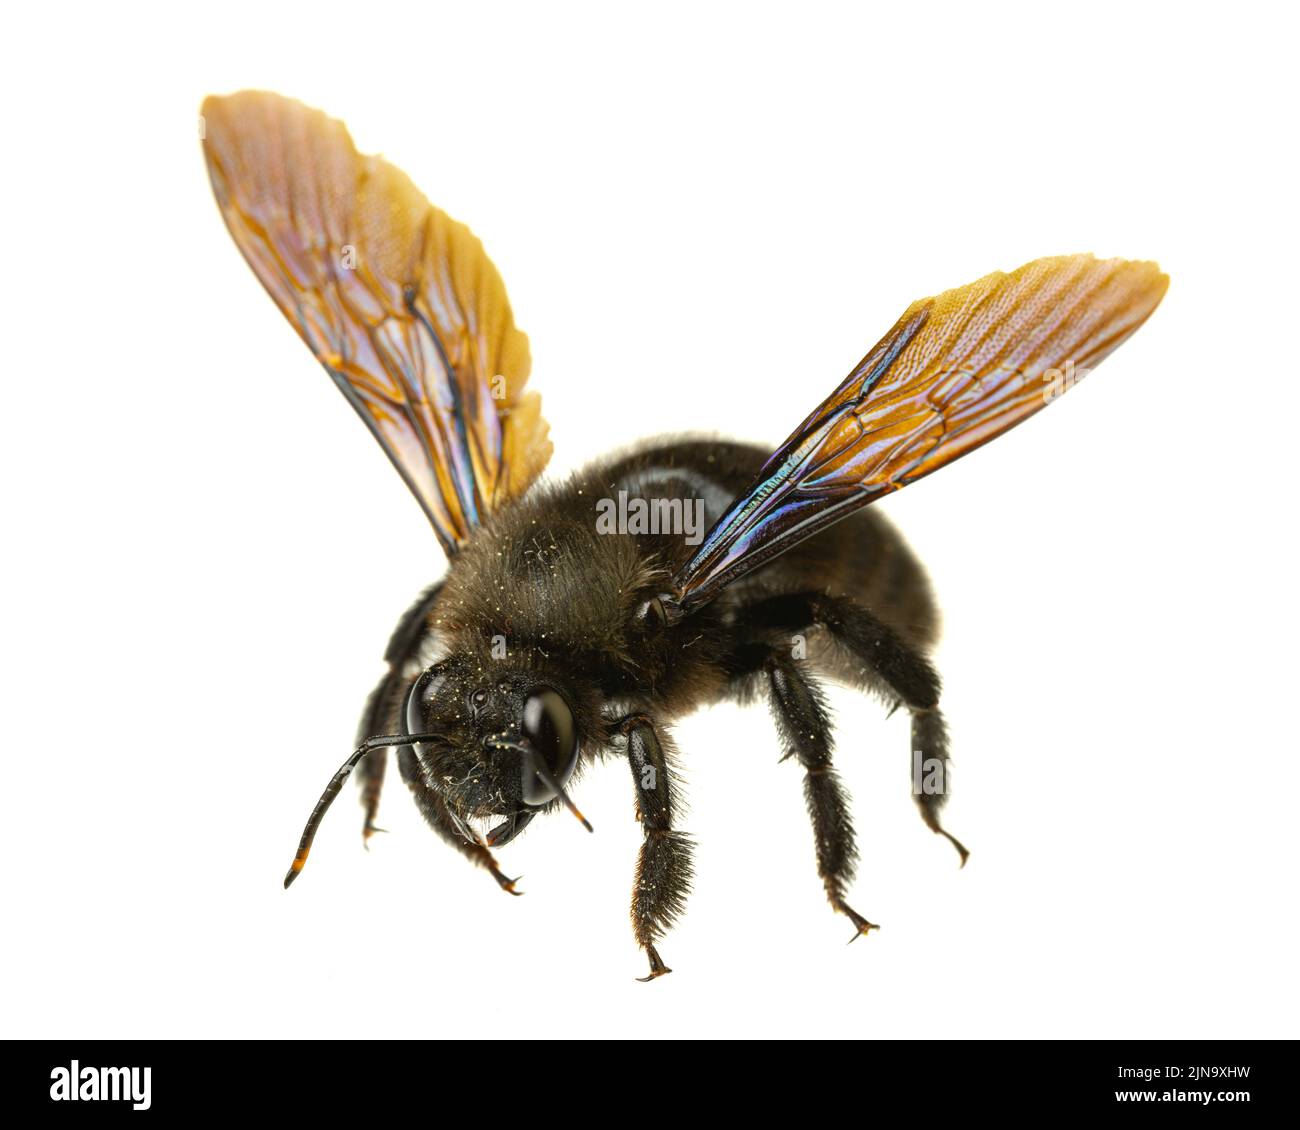 insects of europe - bees: macro of male violet carpenter bee (Xylocopa violacea german Blauschwarze Holzbiene)  isolated on white background with spre Stock Photo